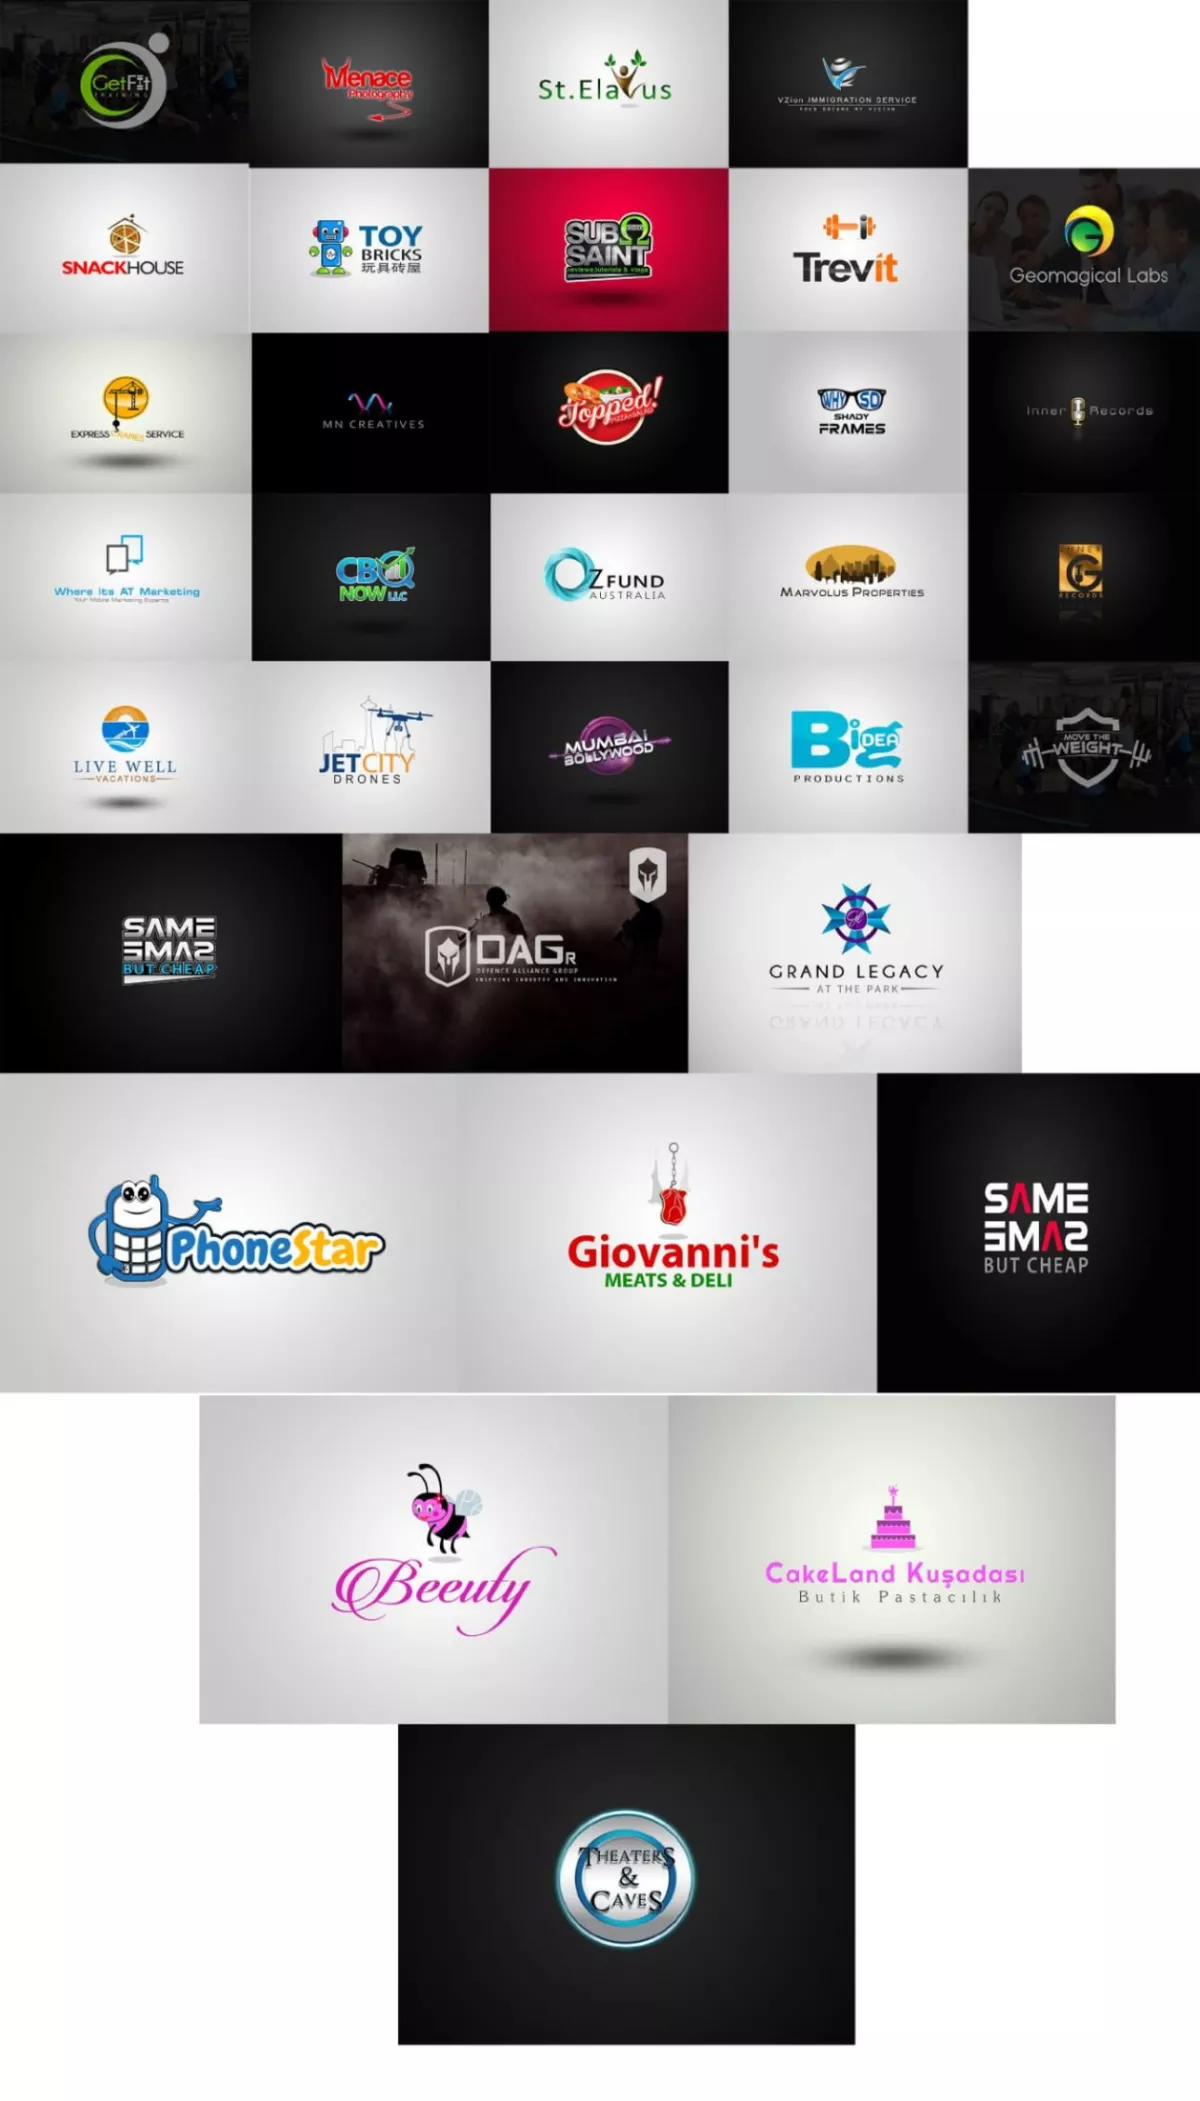 I will design professional logo for your website or business